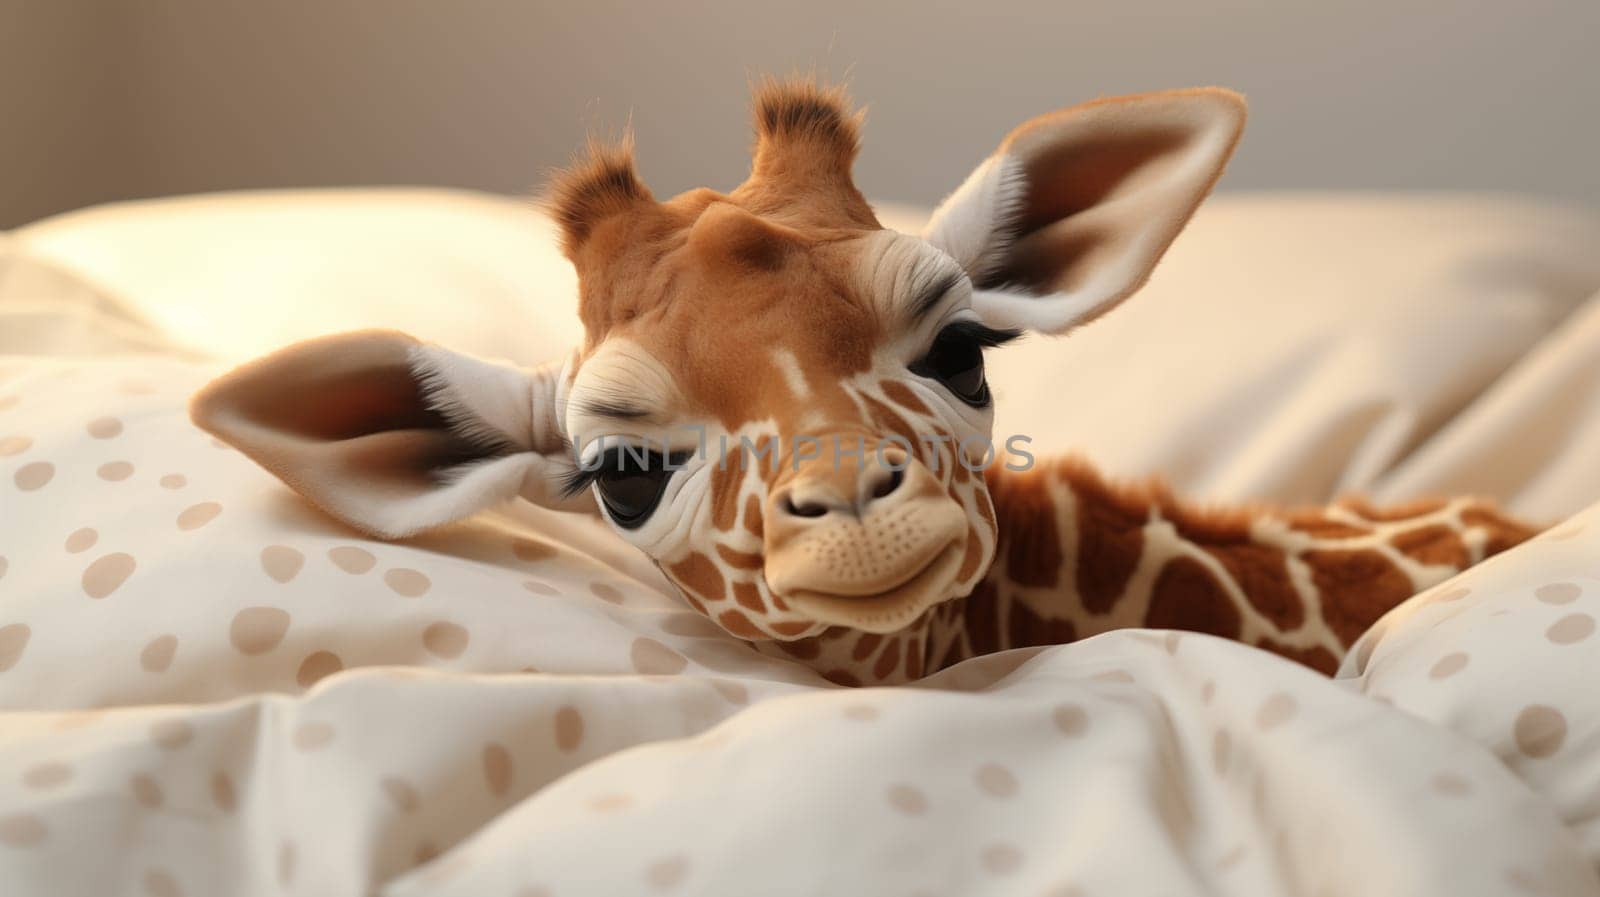 Adorable baby giraffe , lying in white soft bed, in day light.